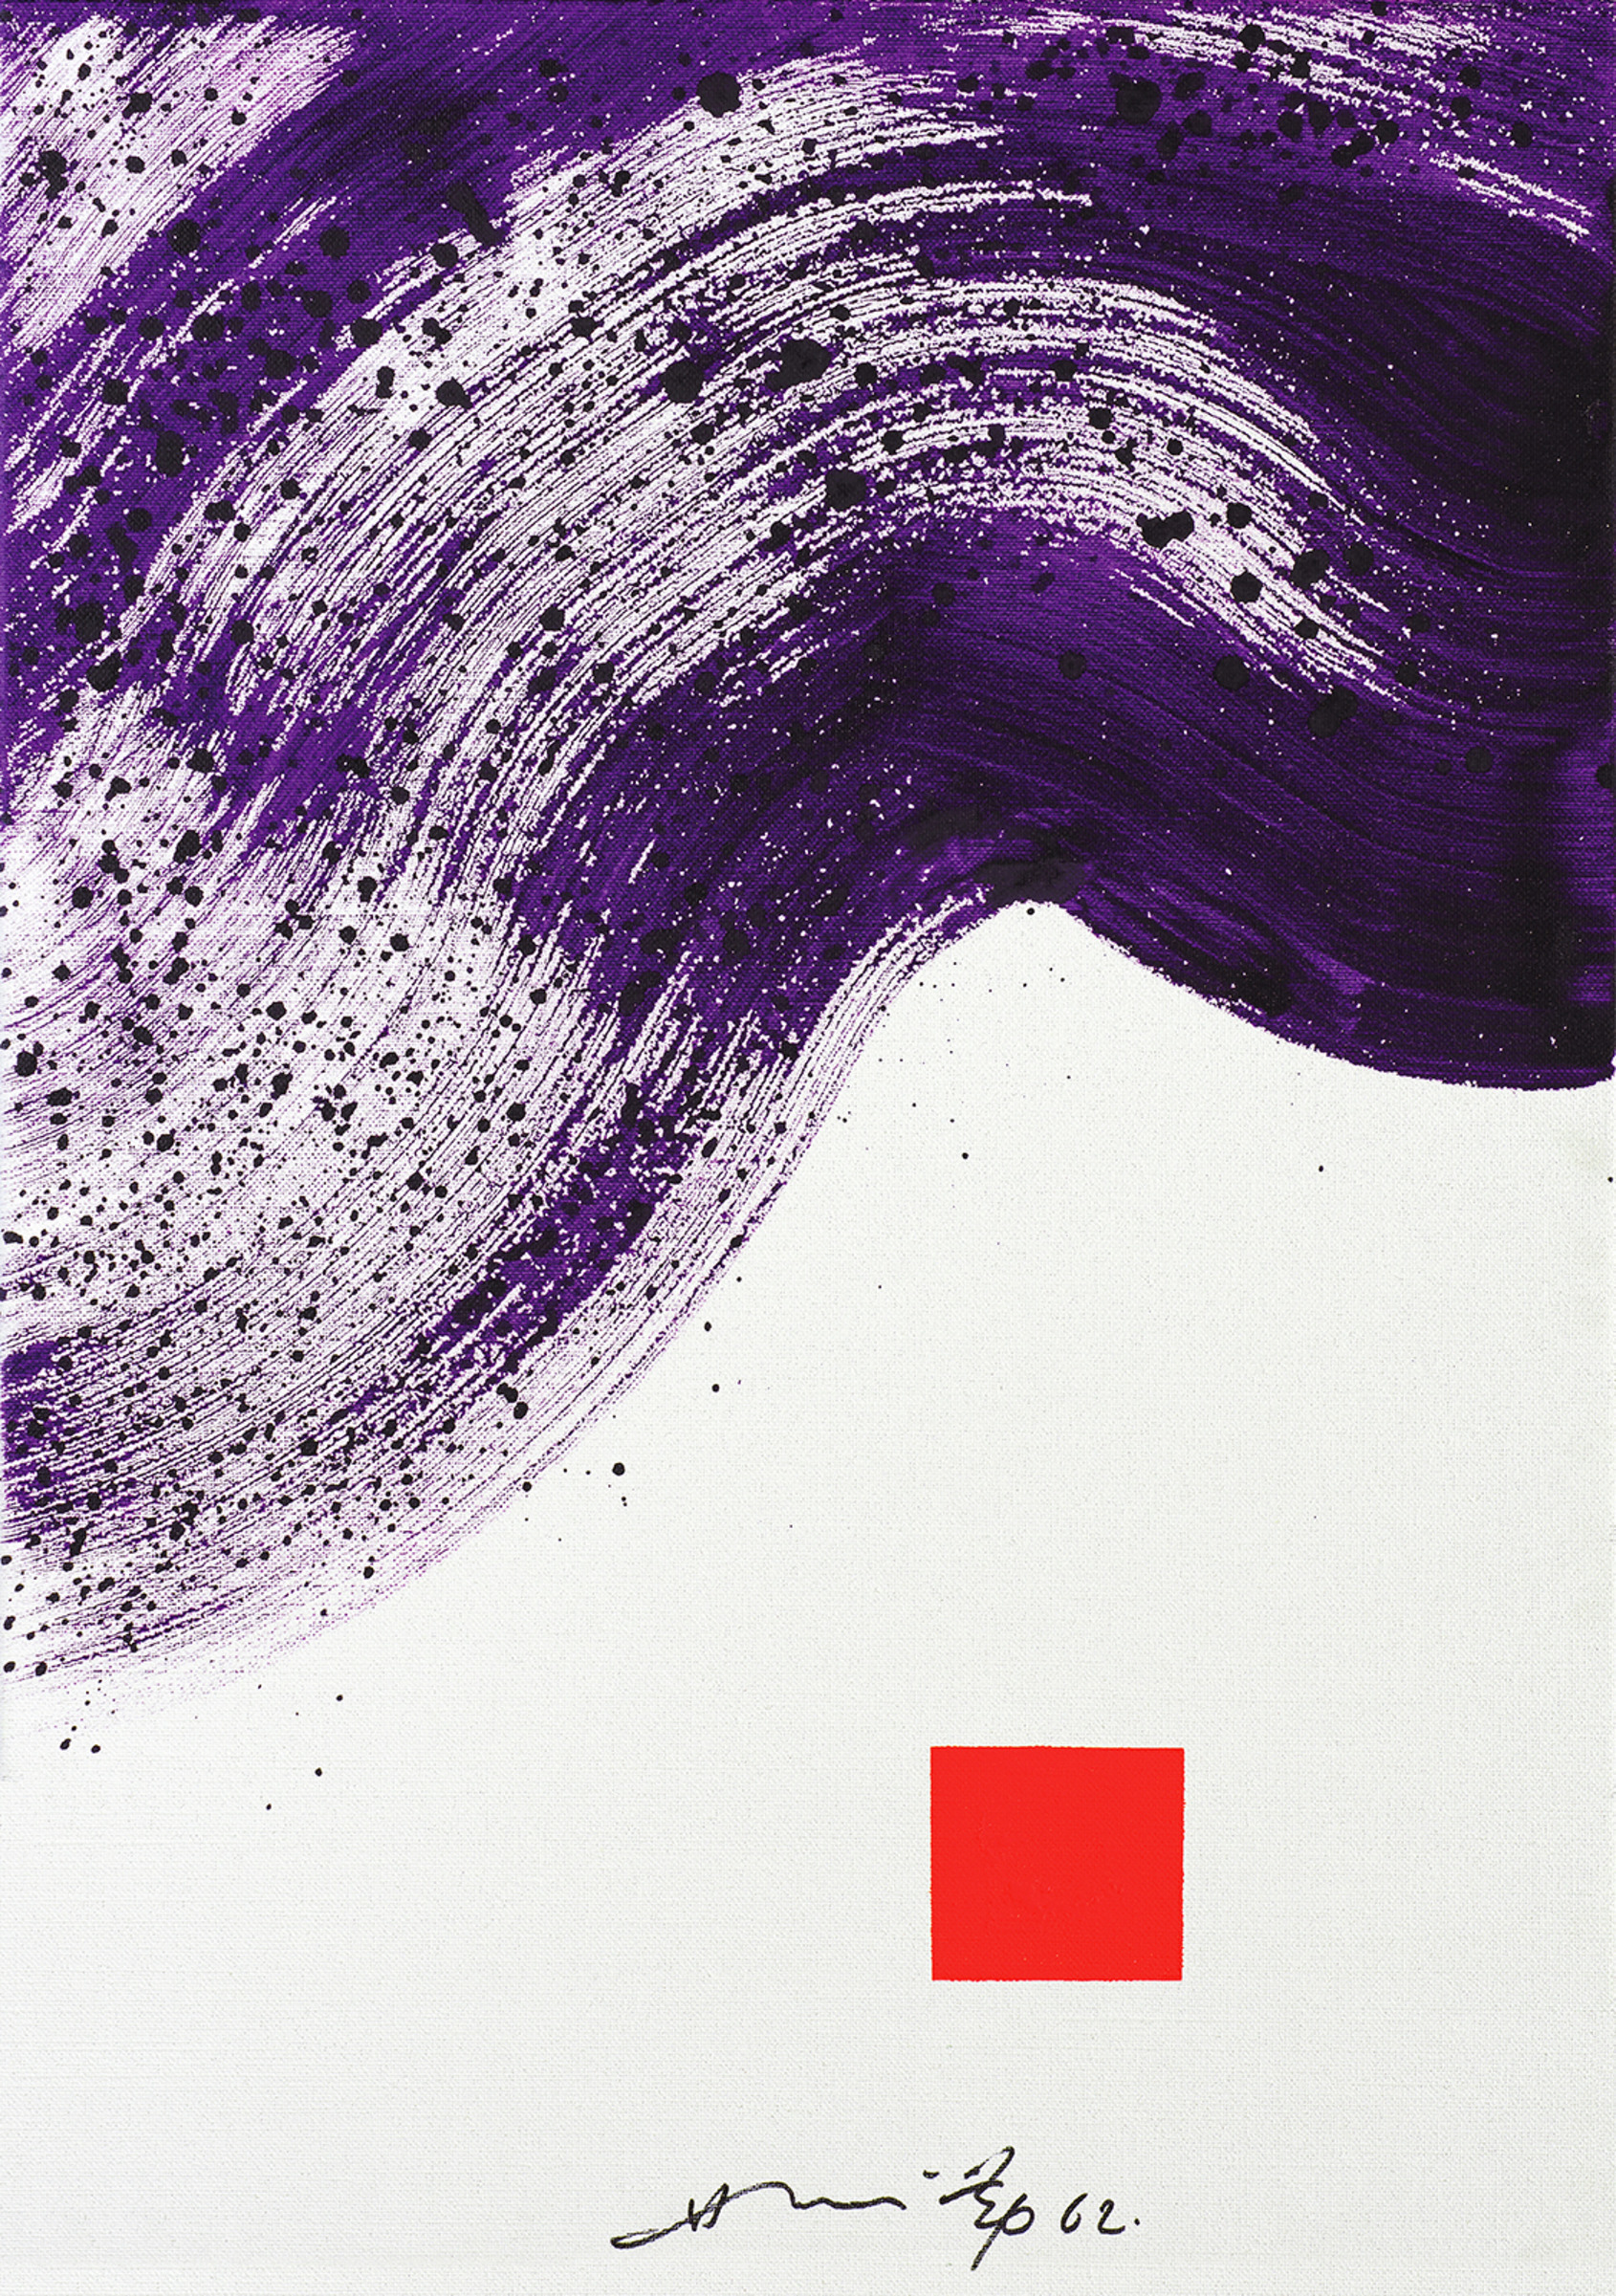 The Beginning of Tao – 2, 1962, 70 x 50 cm Encre et acrylique sur toile Ink and acrylic on canvas Collection privée / Private collection, Europe 